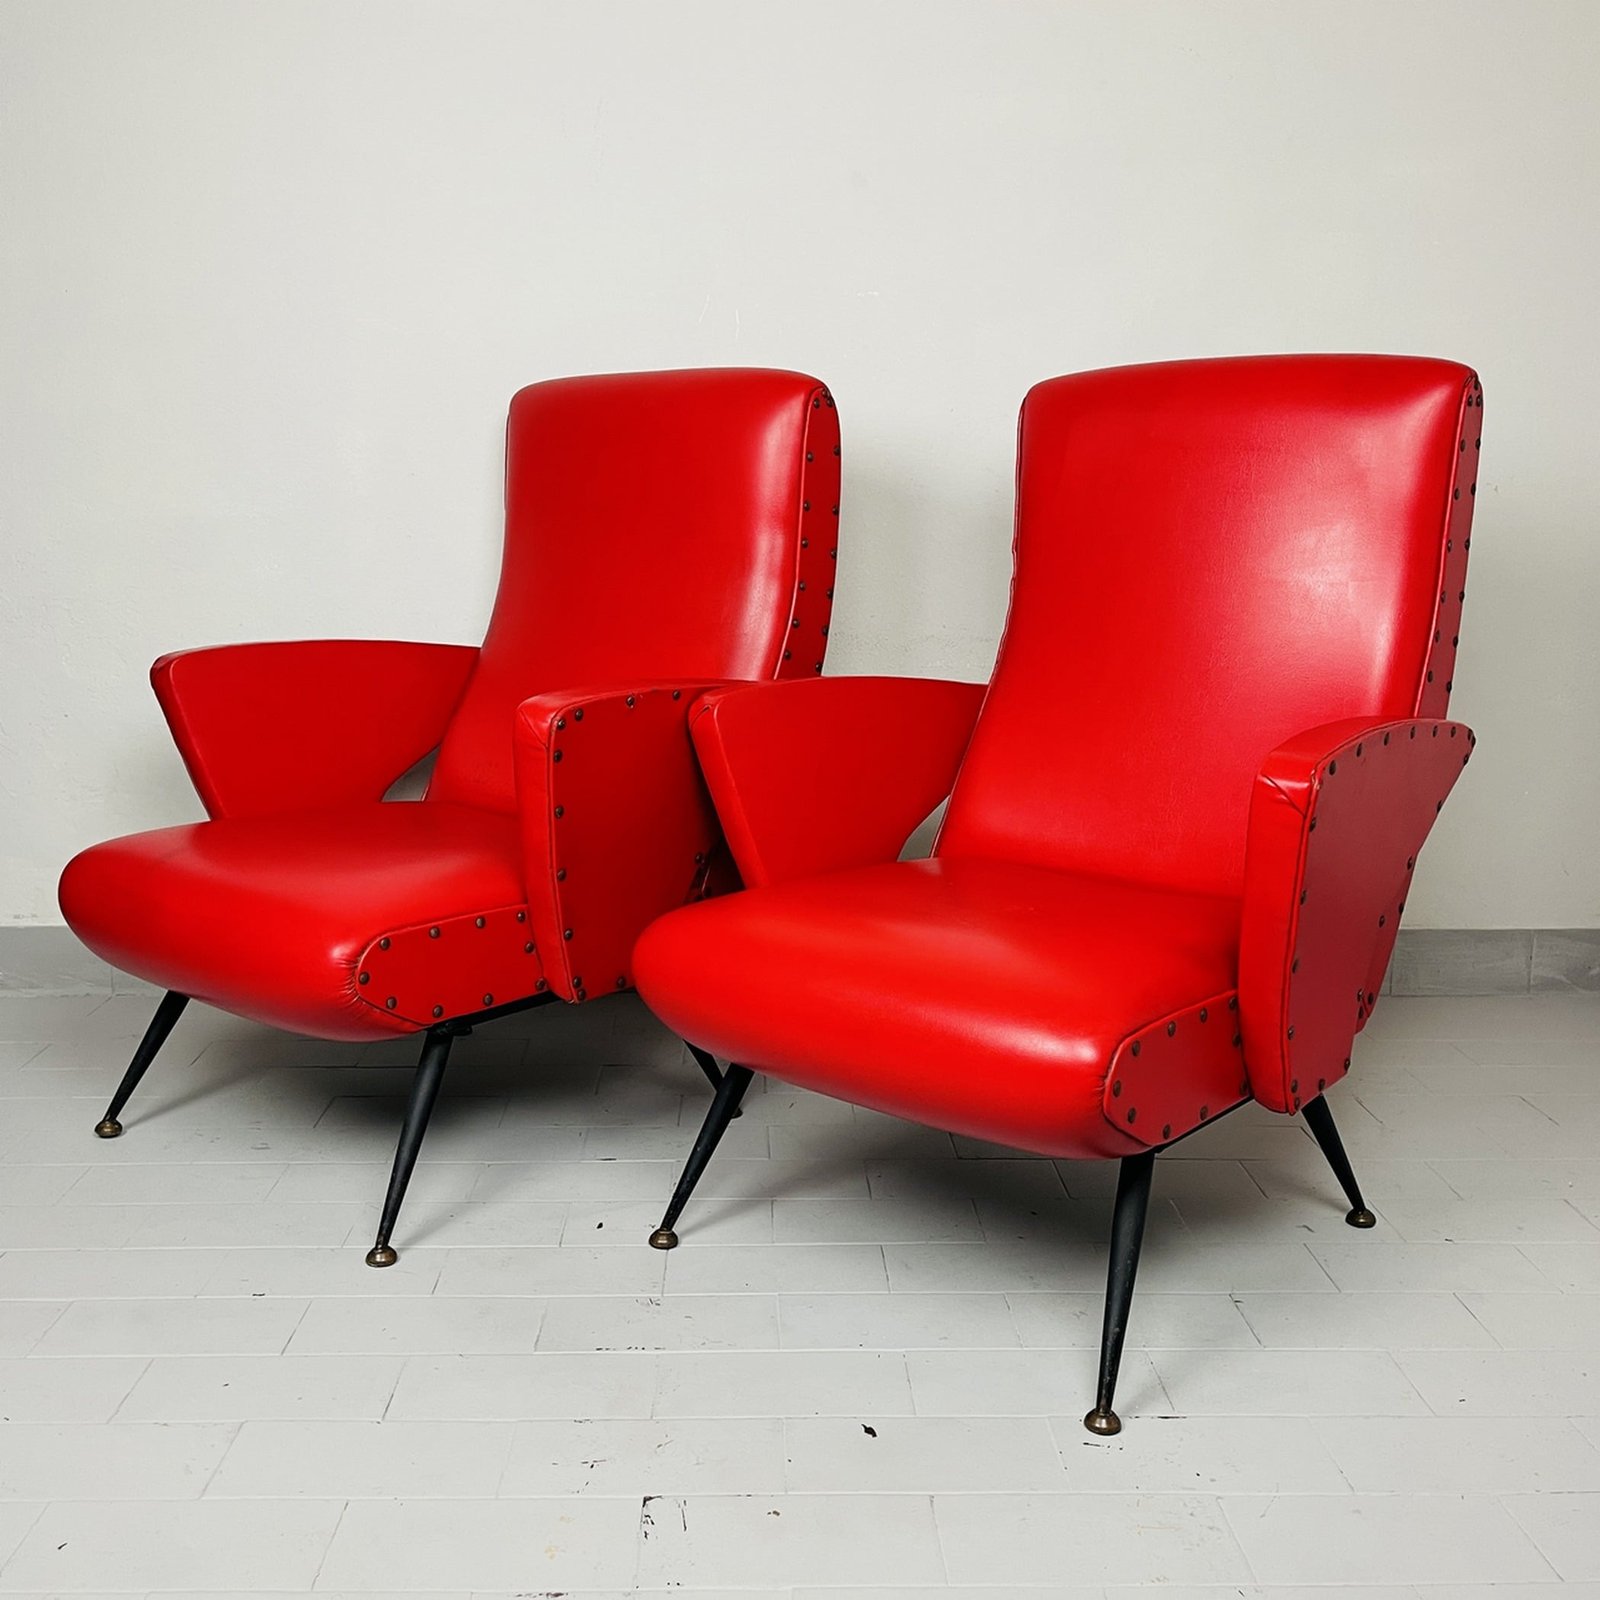 Set of 2 vintage red lounge chair Italy 1950s